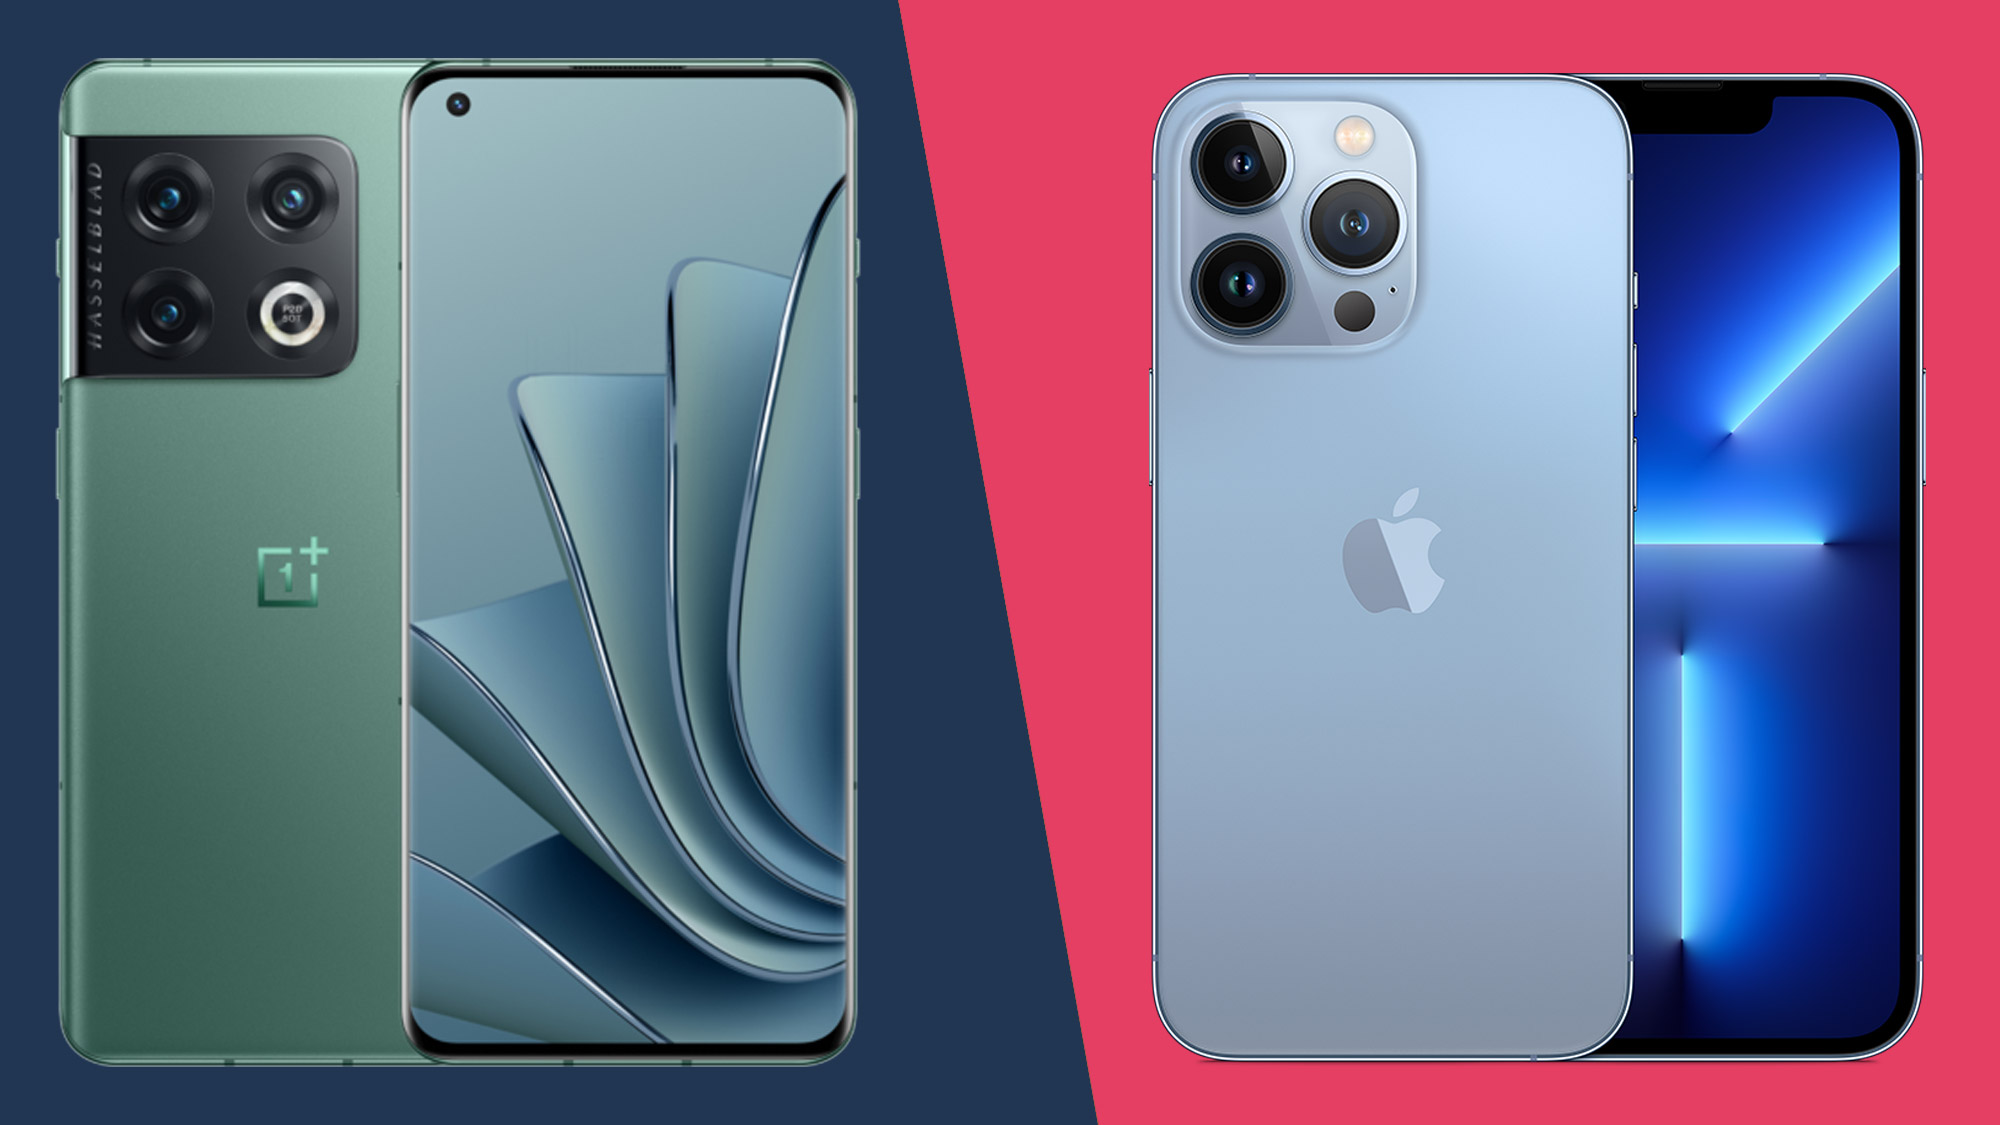 OnePlus 10 Pro vs iPhone 13 Pro two smartphones in the Pro league